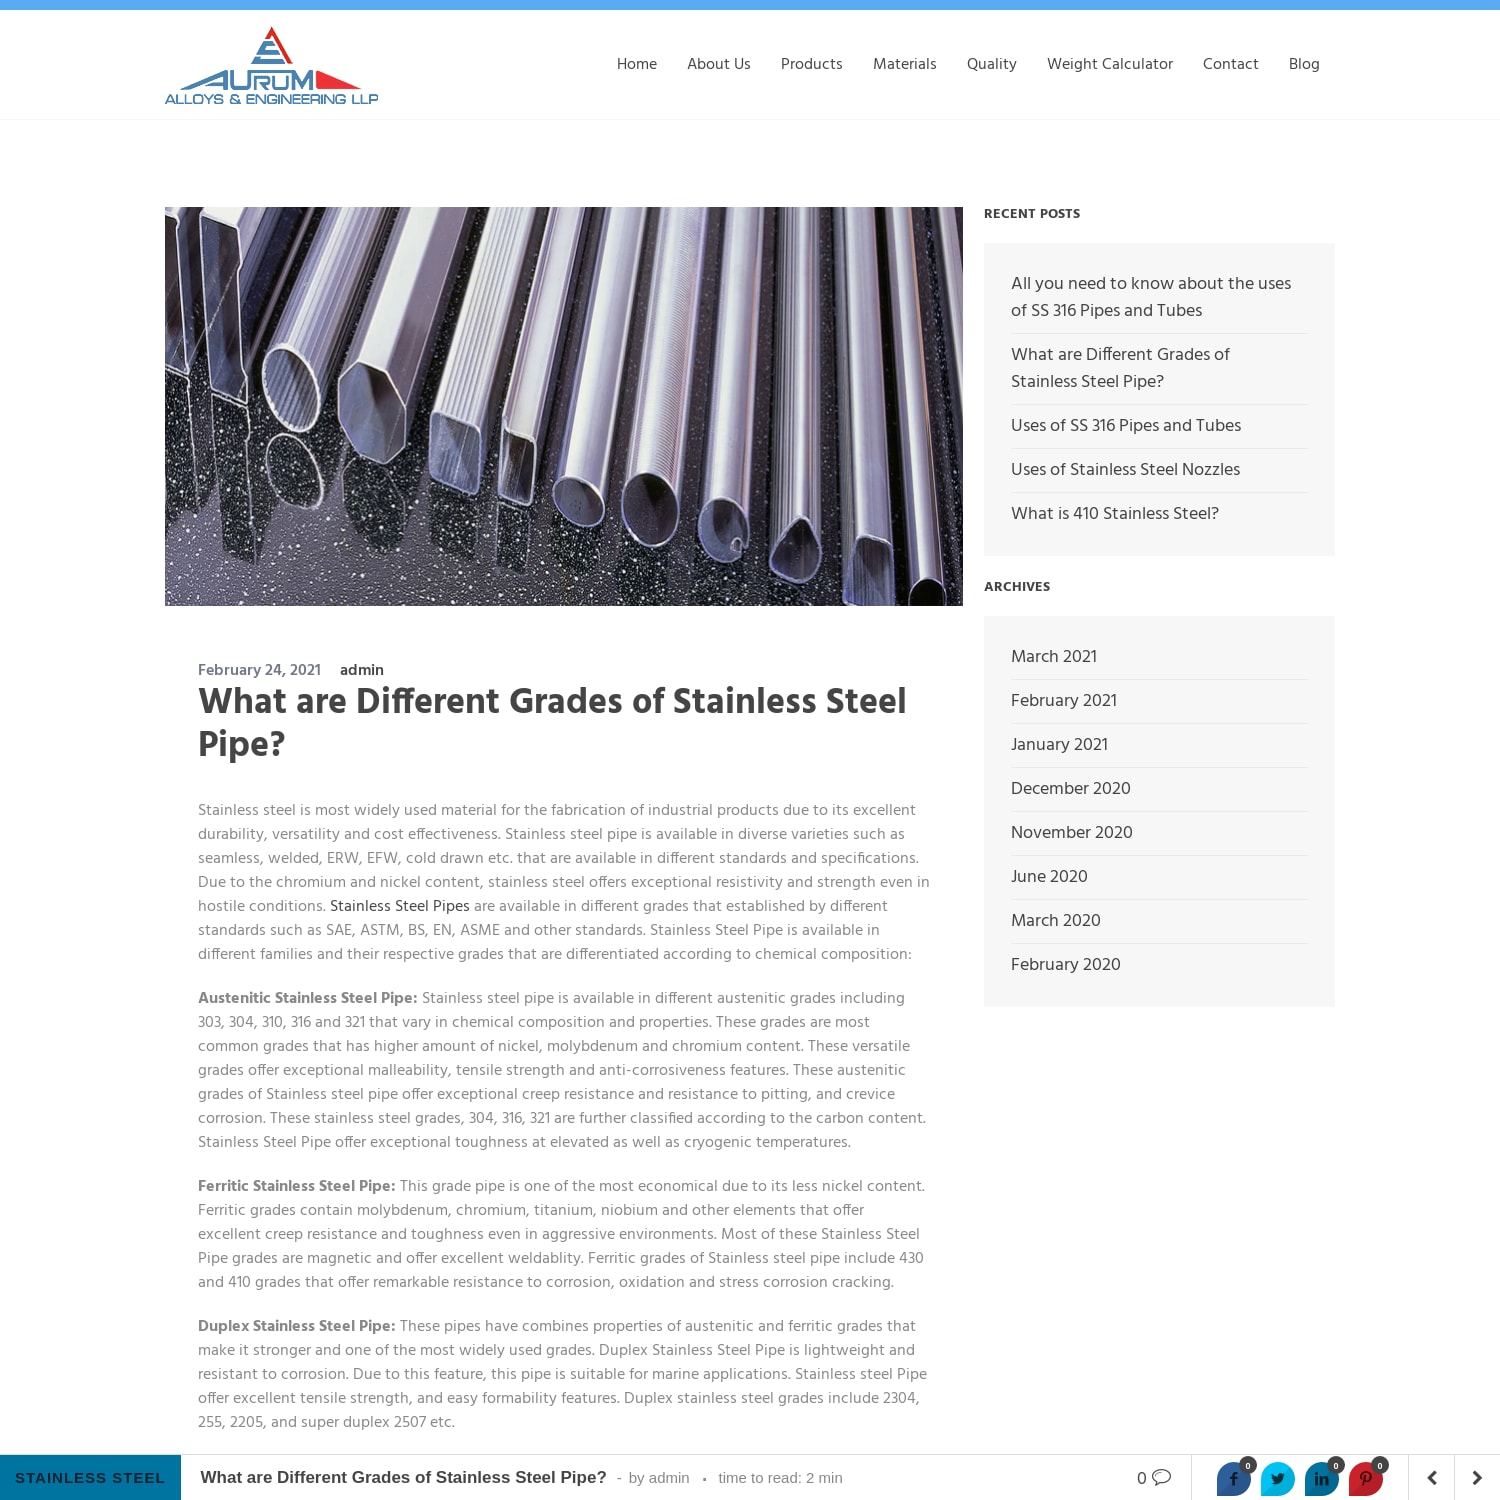 What are Different Grades of Stainless Steel Pipe?